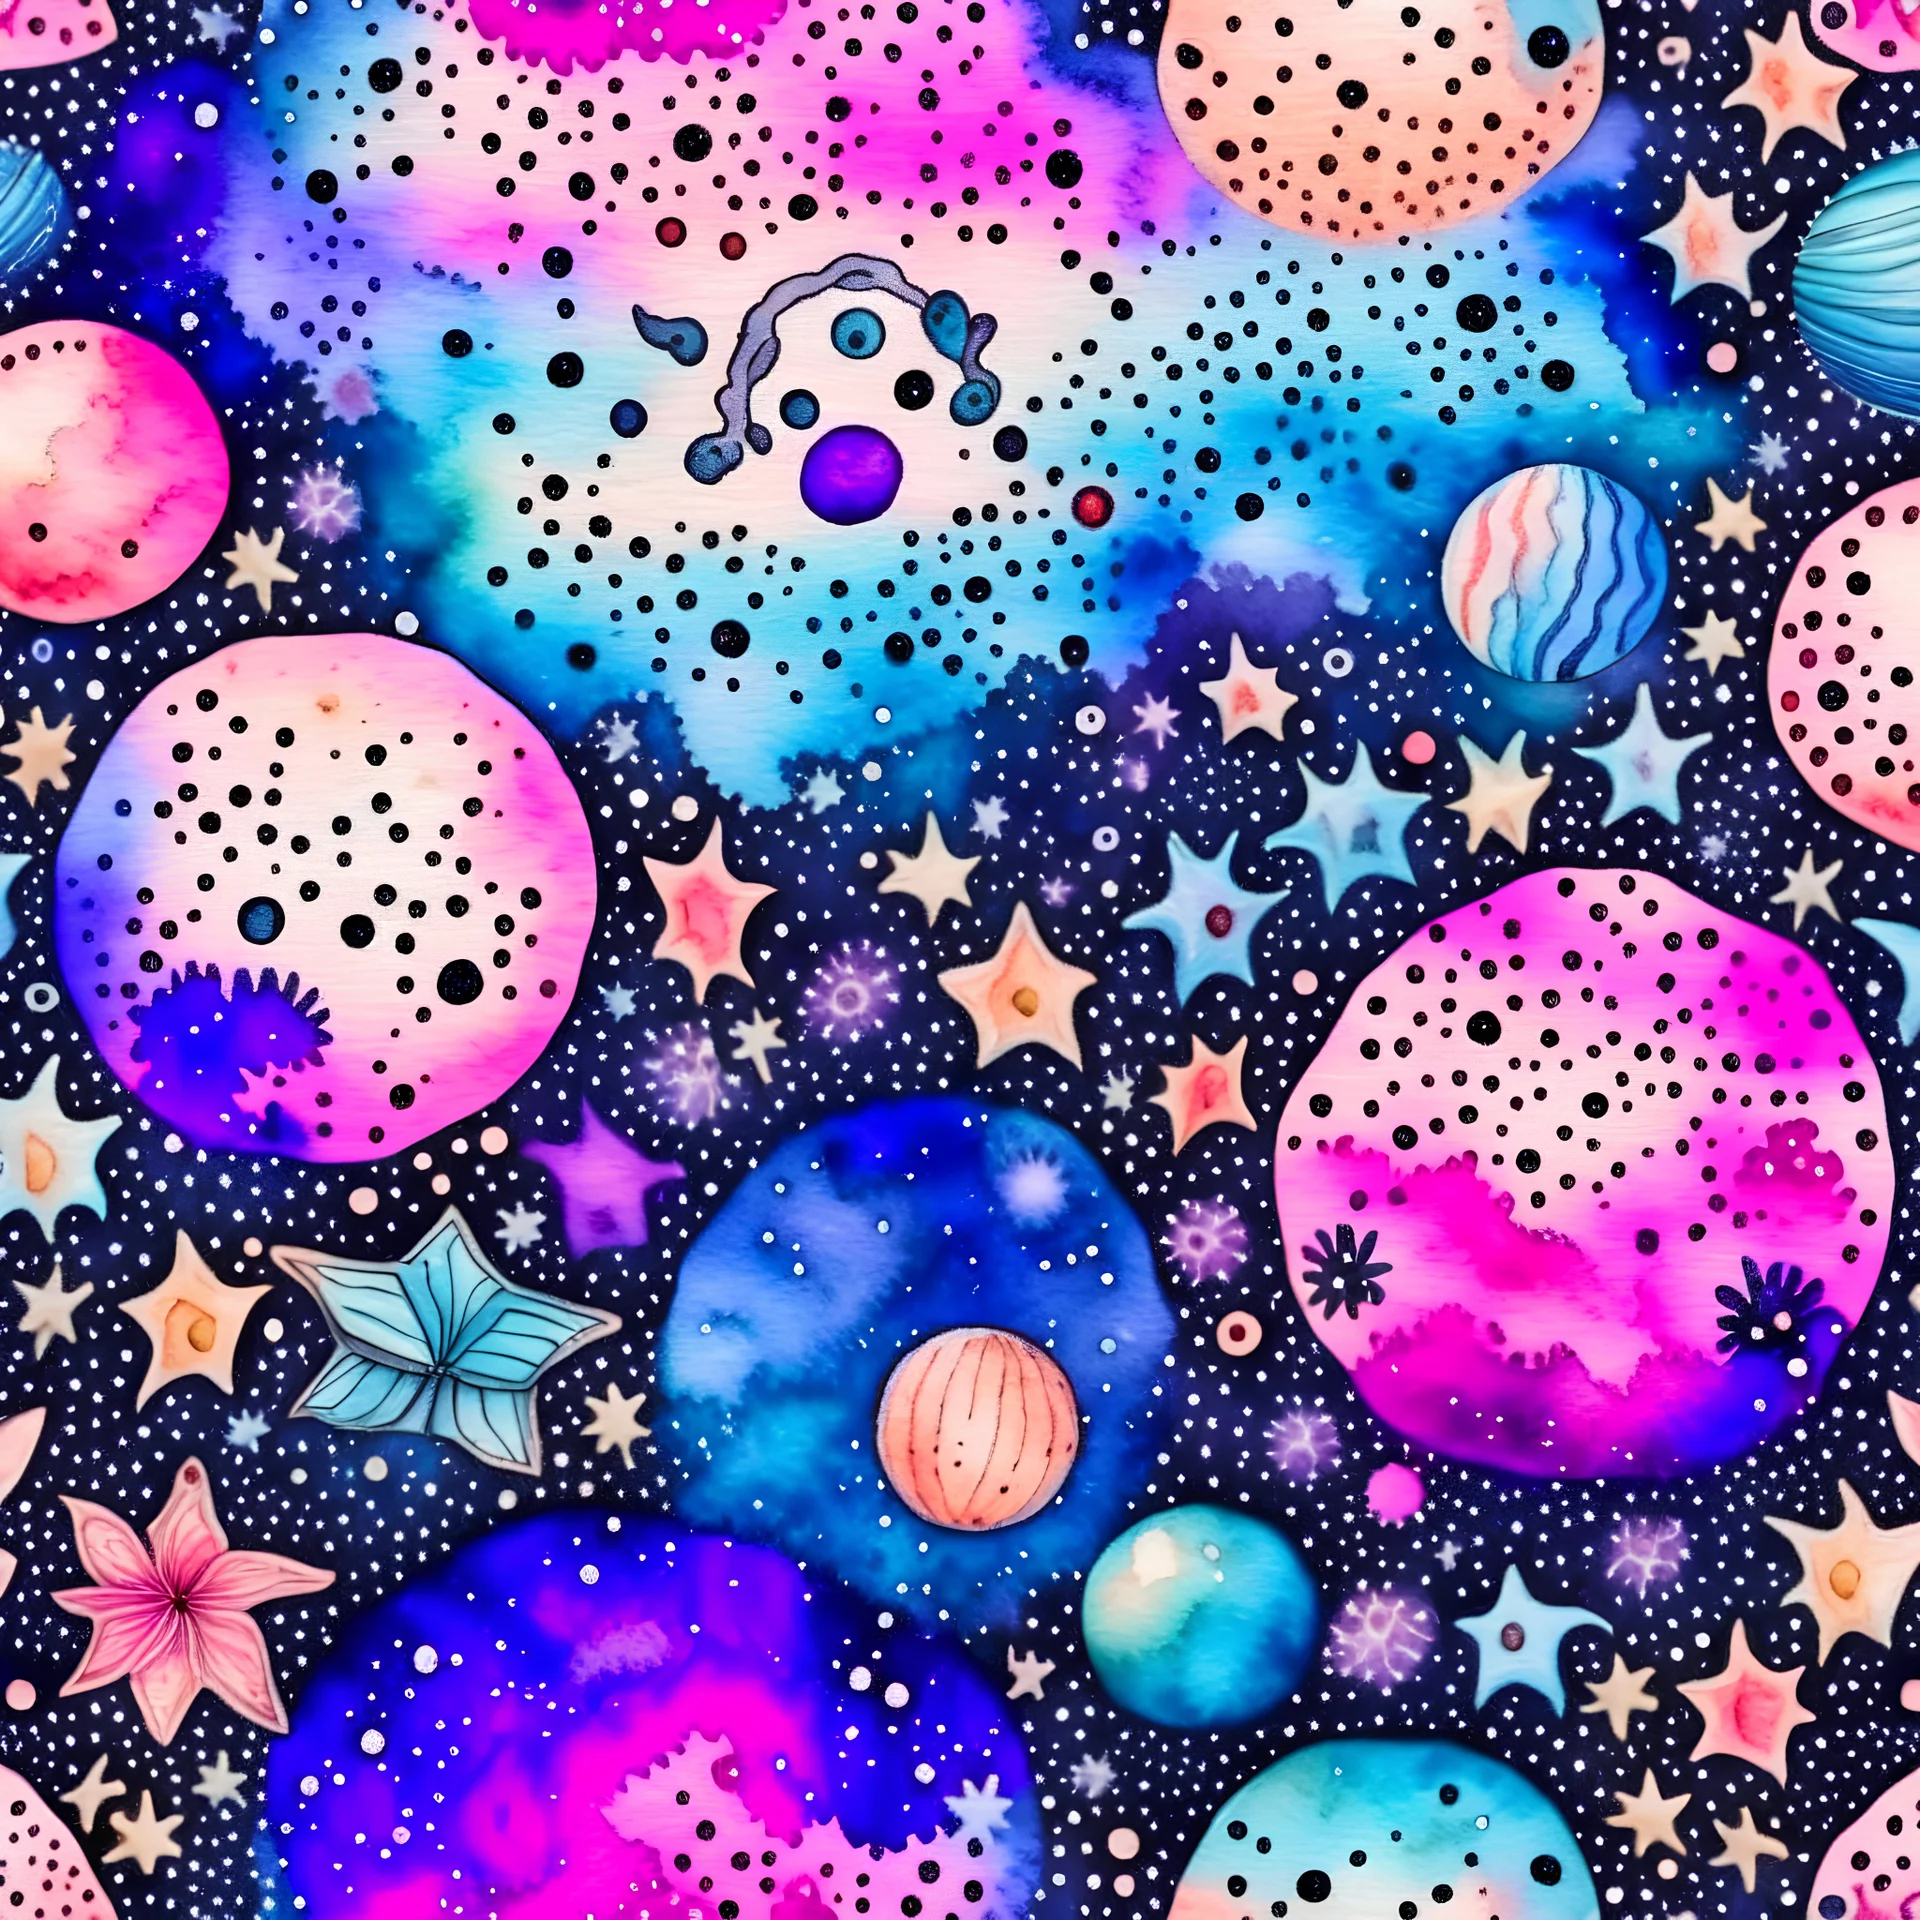 watercolor watercolor pattern space with planets, stars and butterflies, in the style of y2k aesthetic, soft and dreamy depictions. --style raw